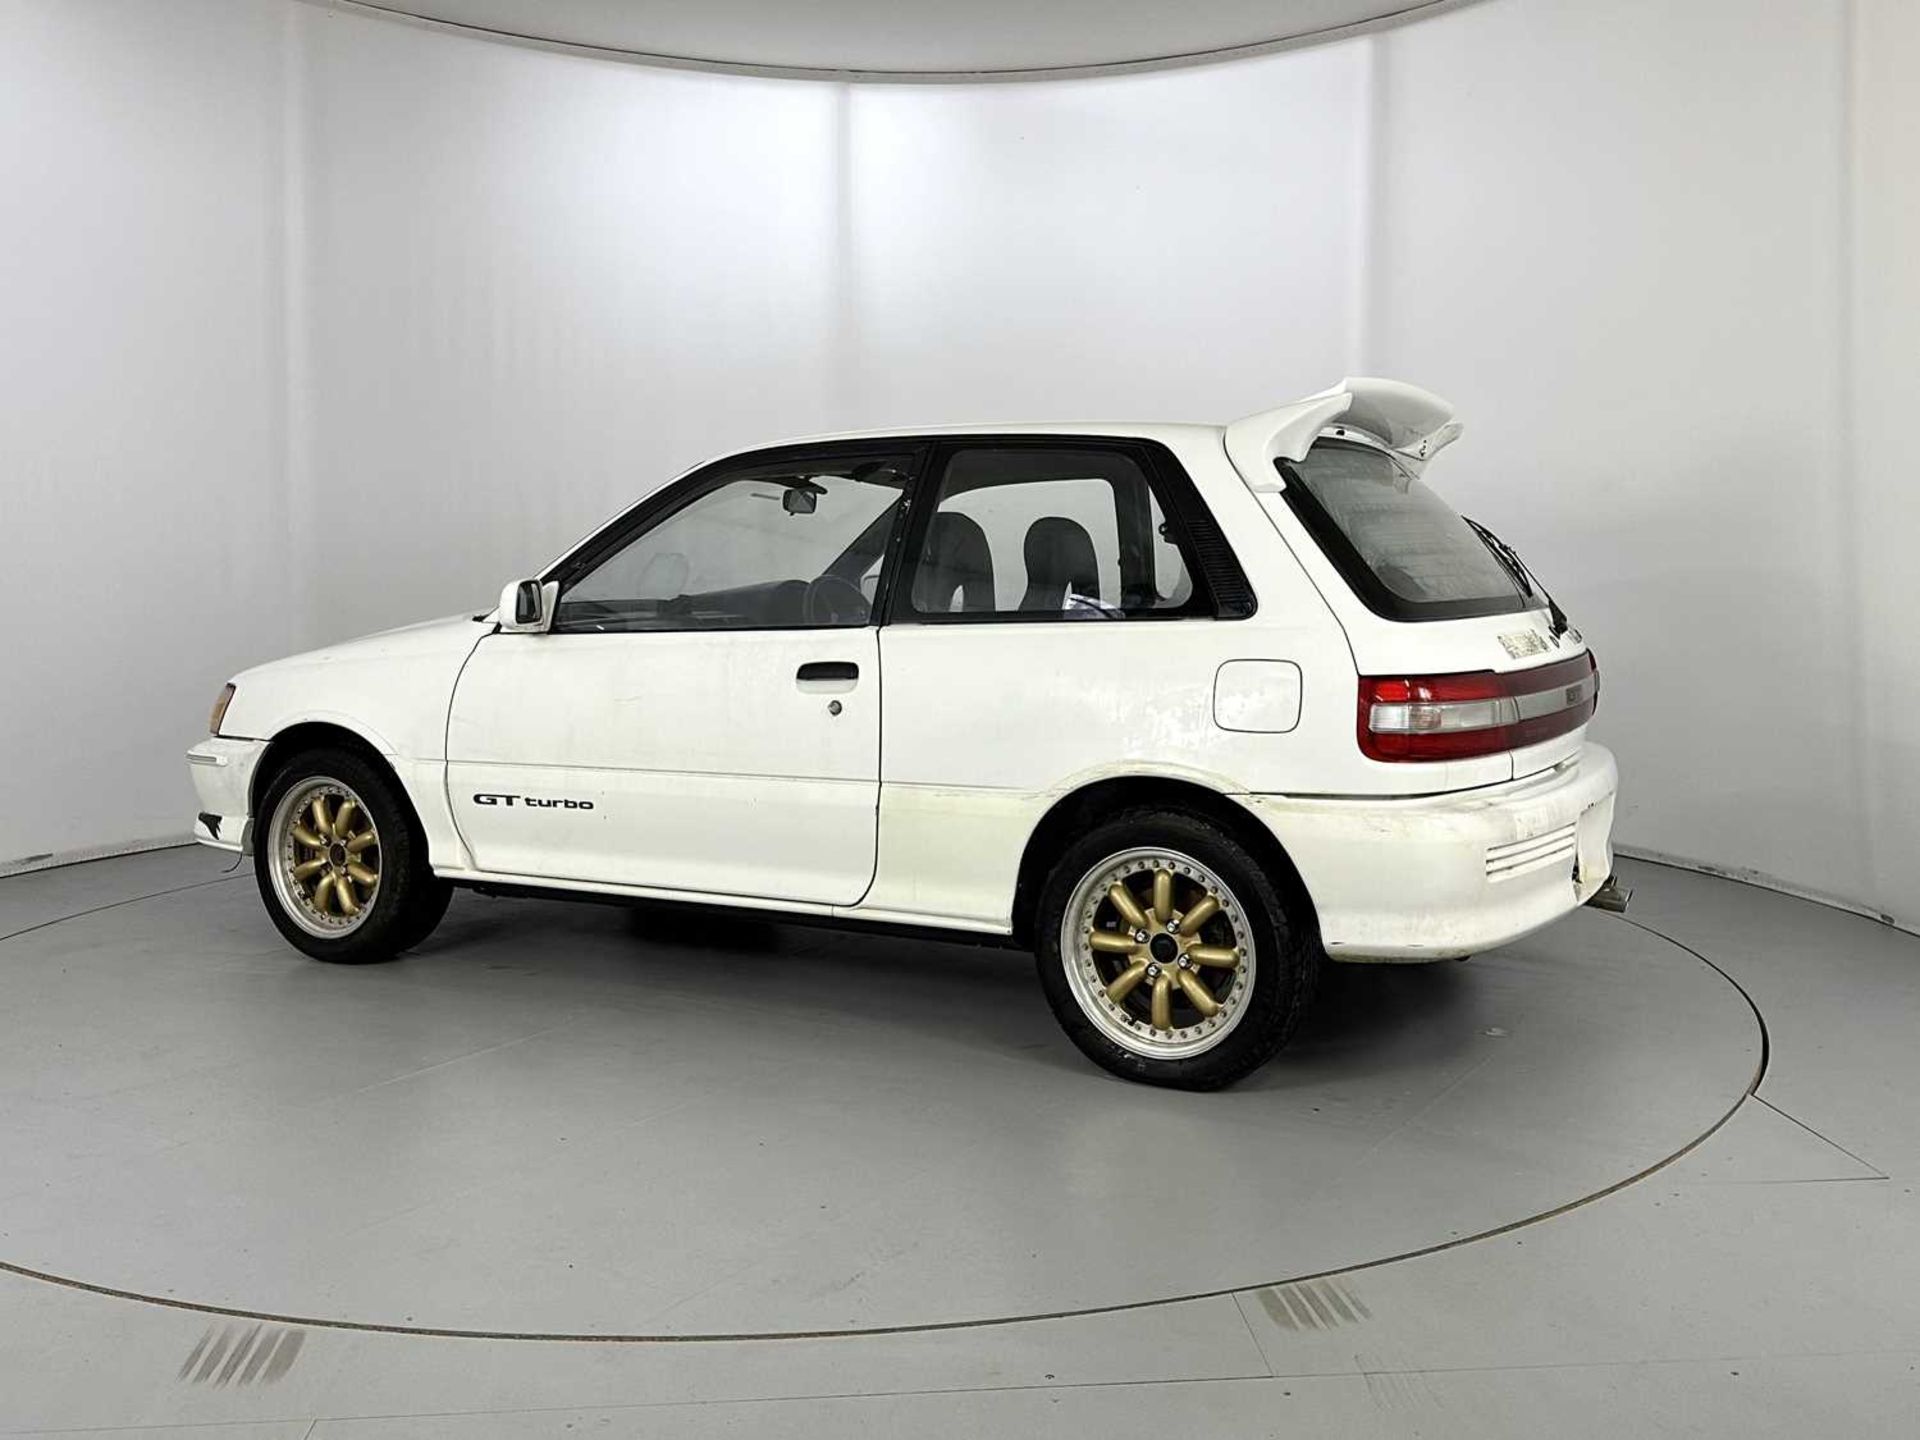 1990 Toyota Starlet GT Turbo - Image 6 of 29